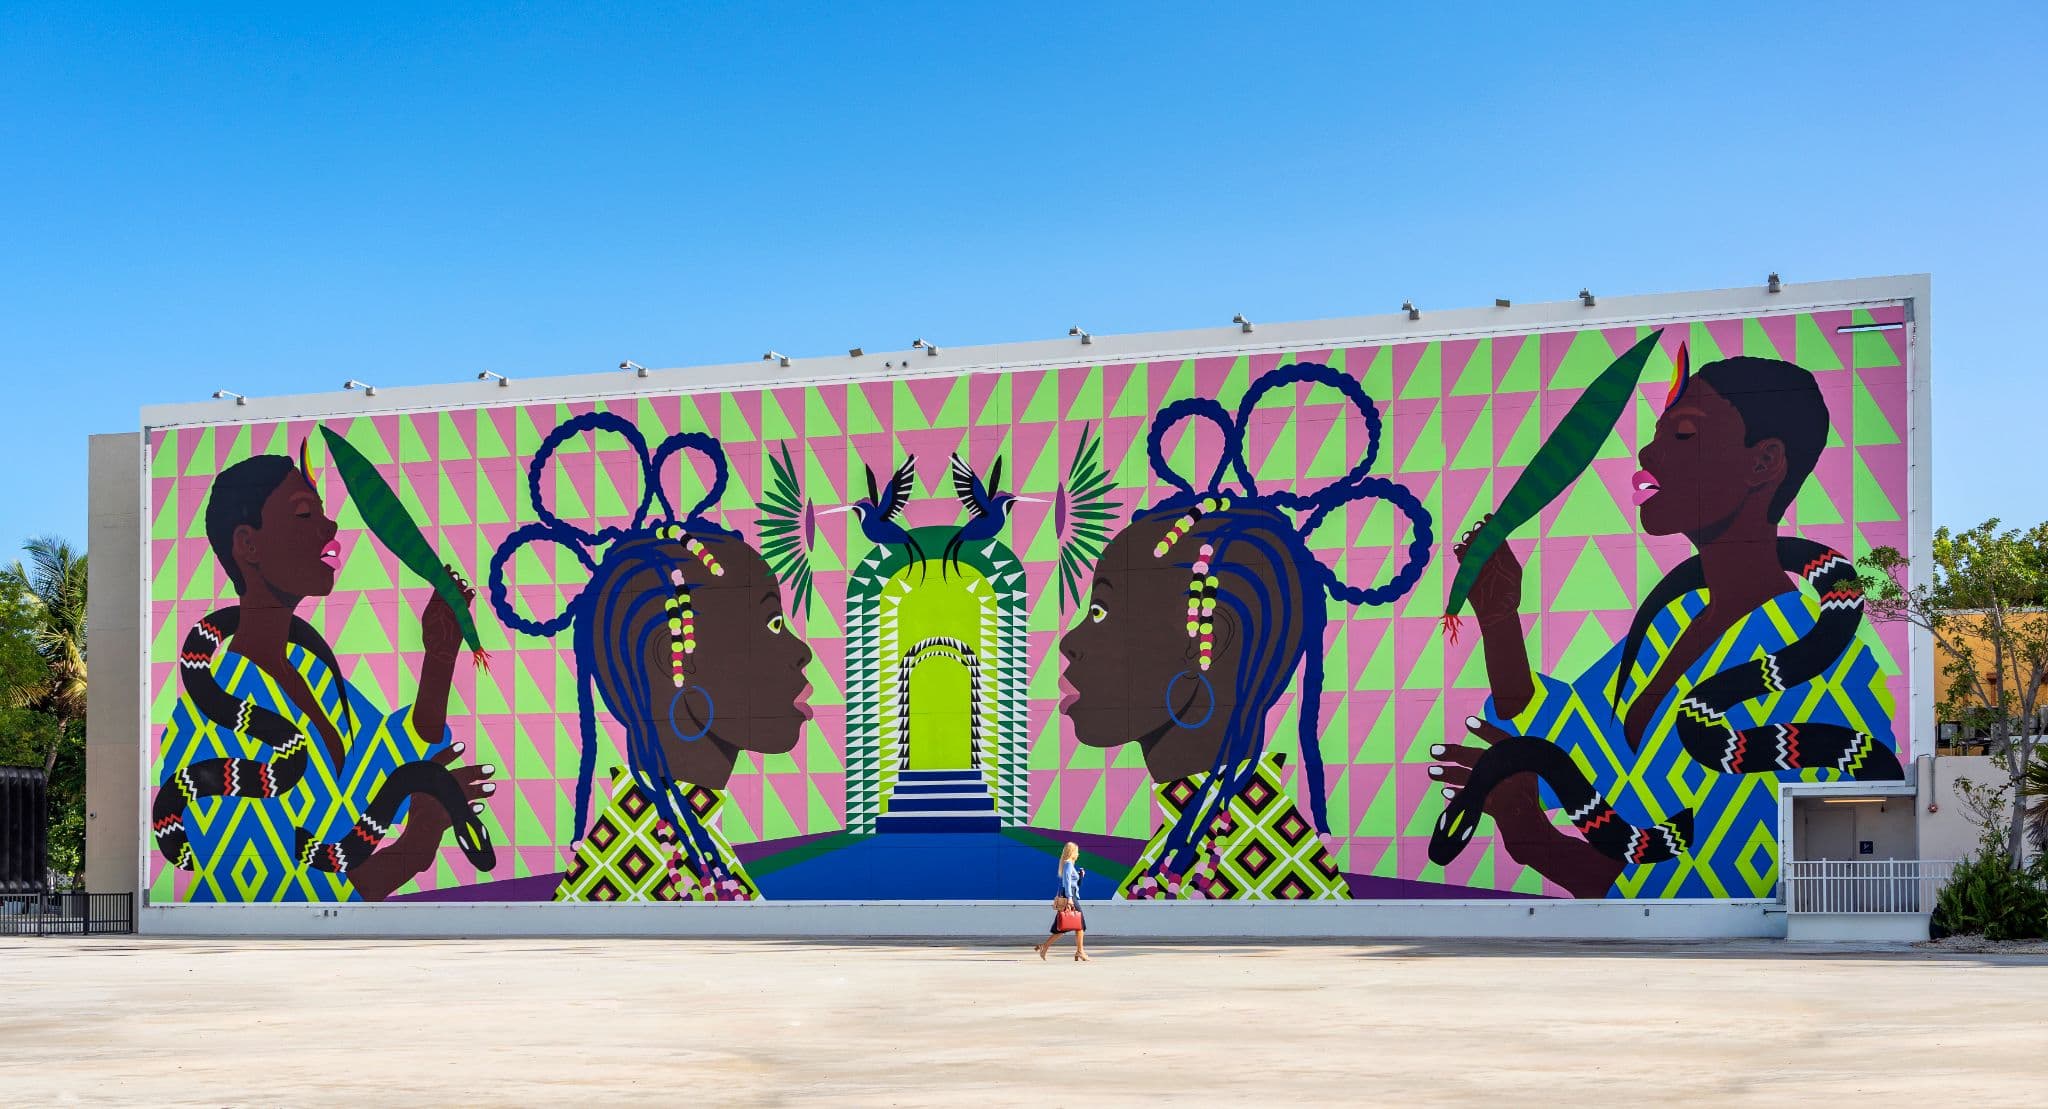 The Design District: Miami's Hub for Art, Design and Luxury Shopping